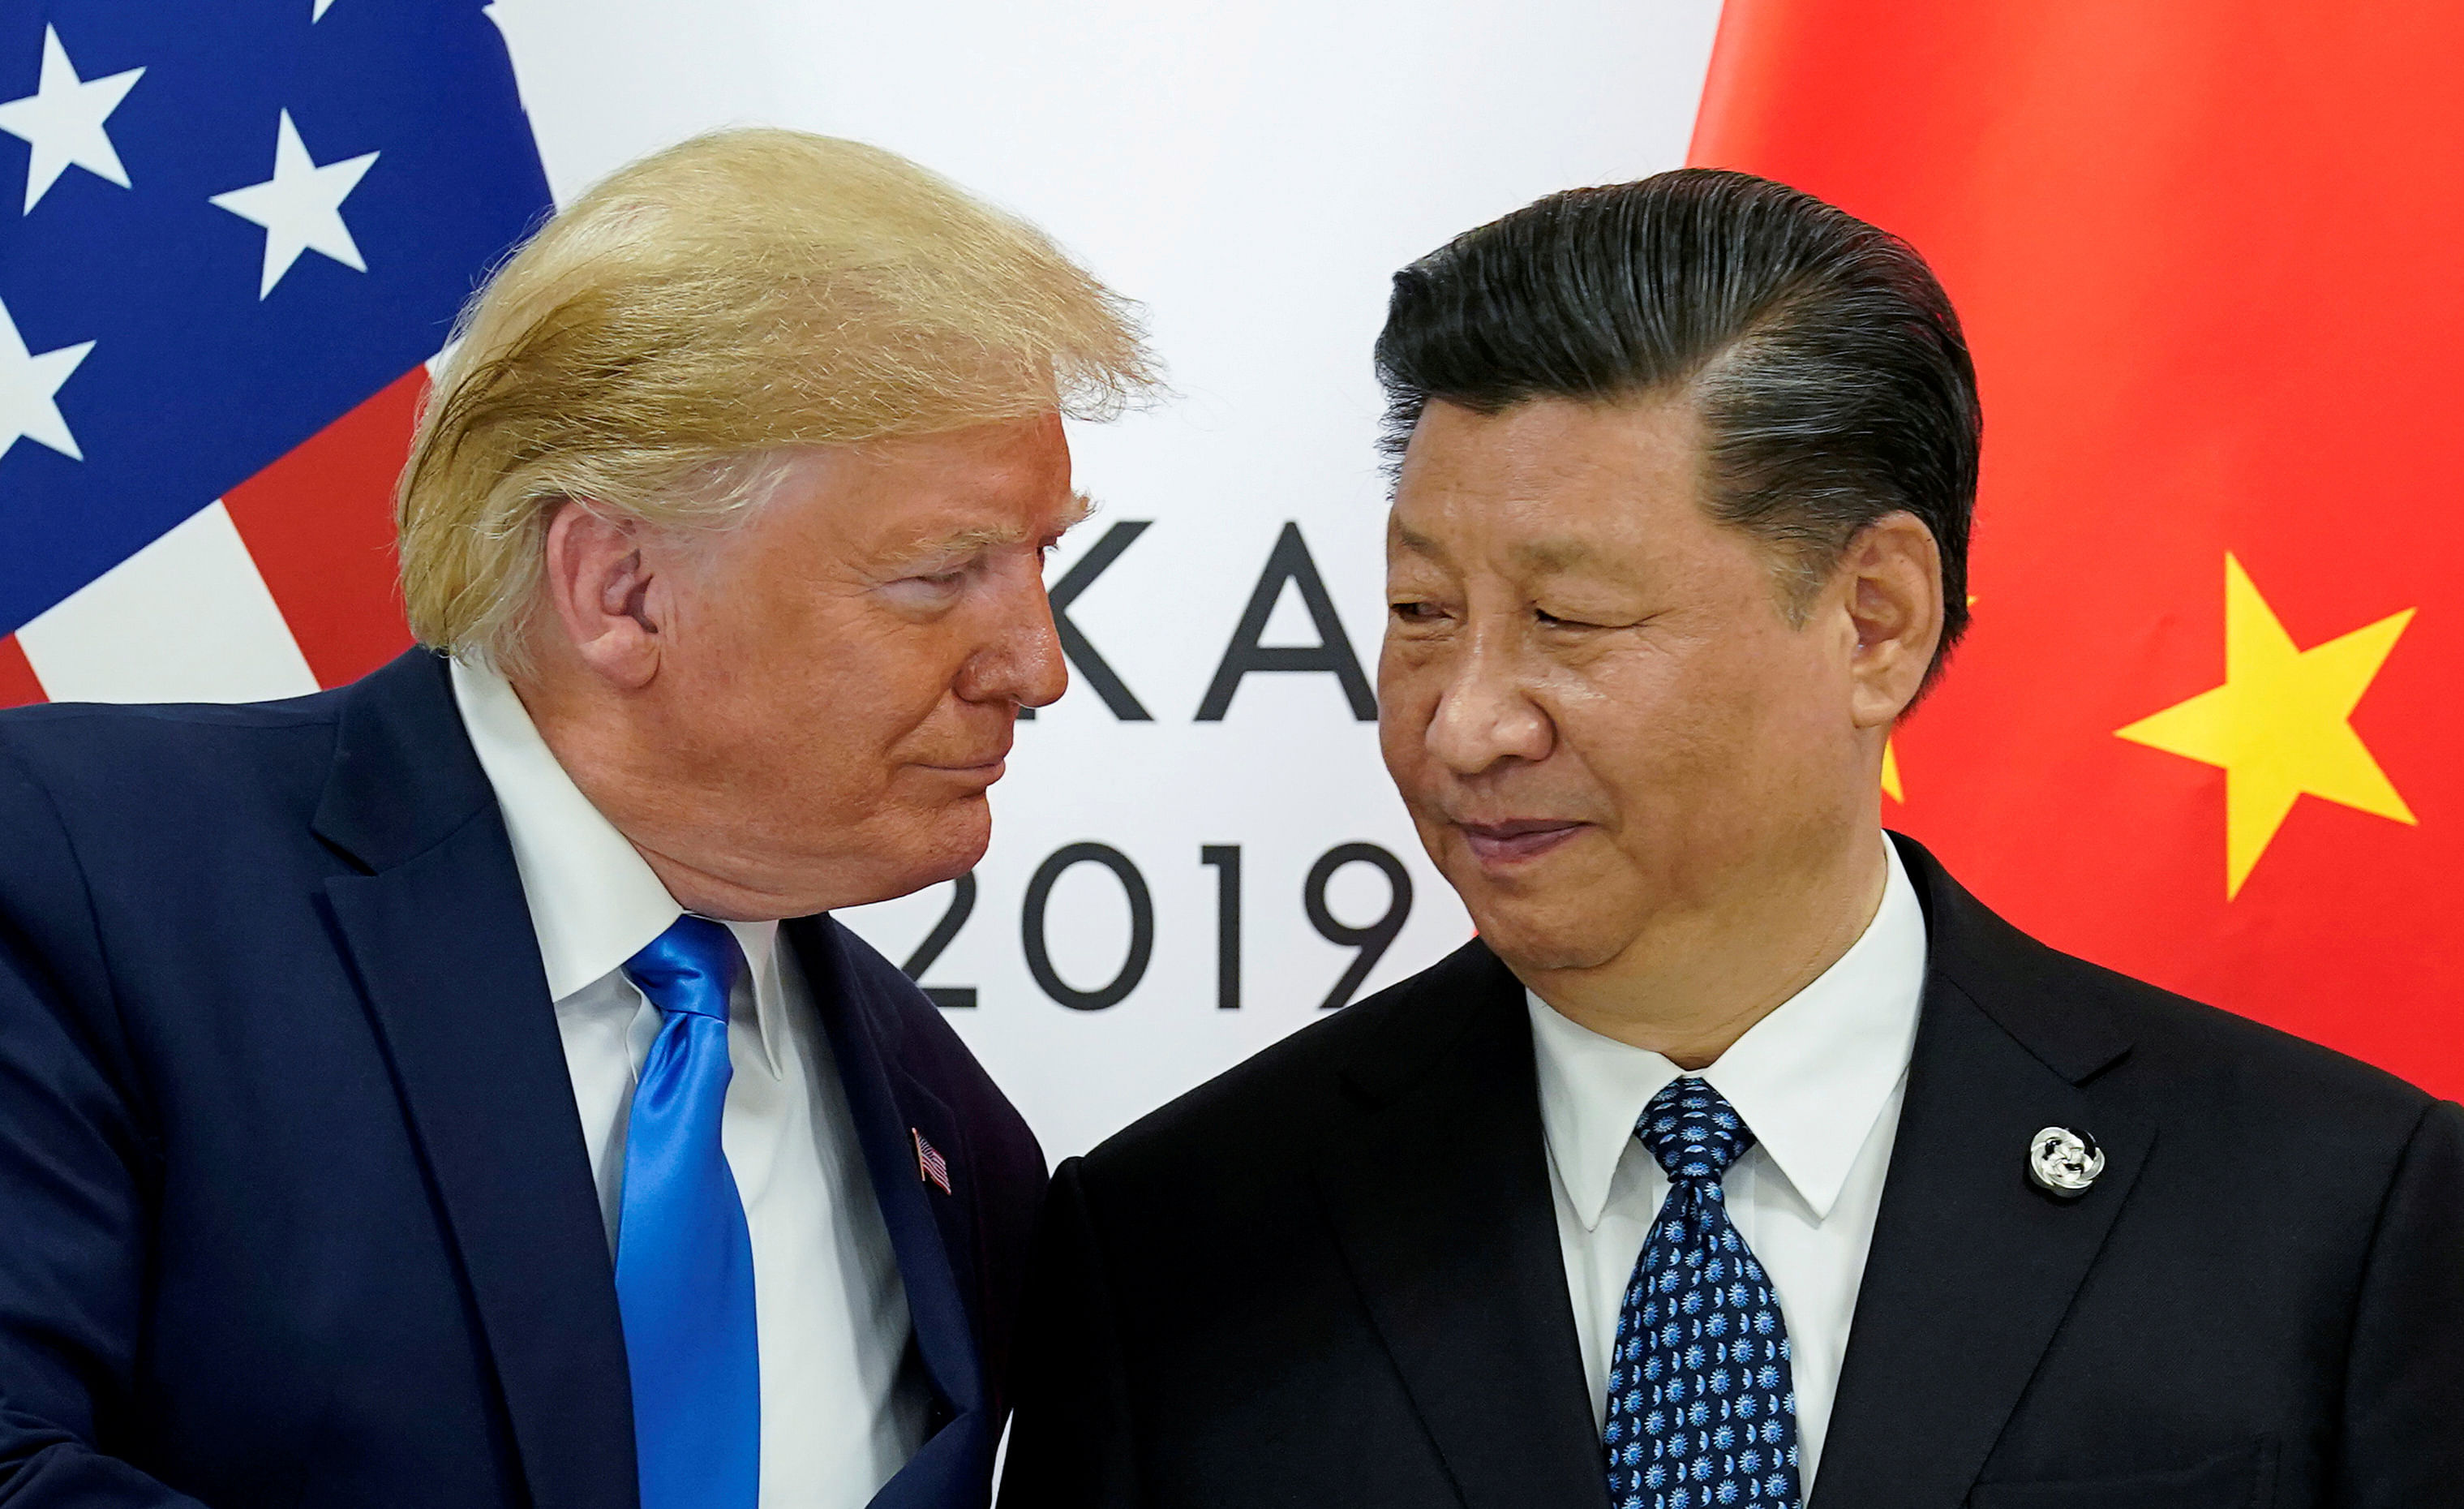 US President Donald Trump meets with China's President Xi Jinping. (Reuters Photo)